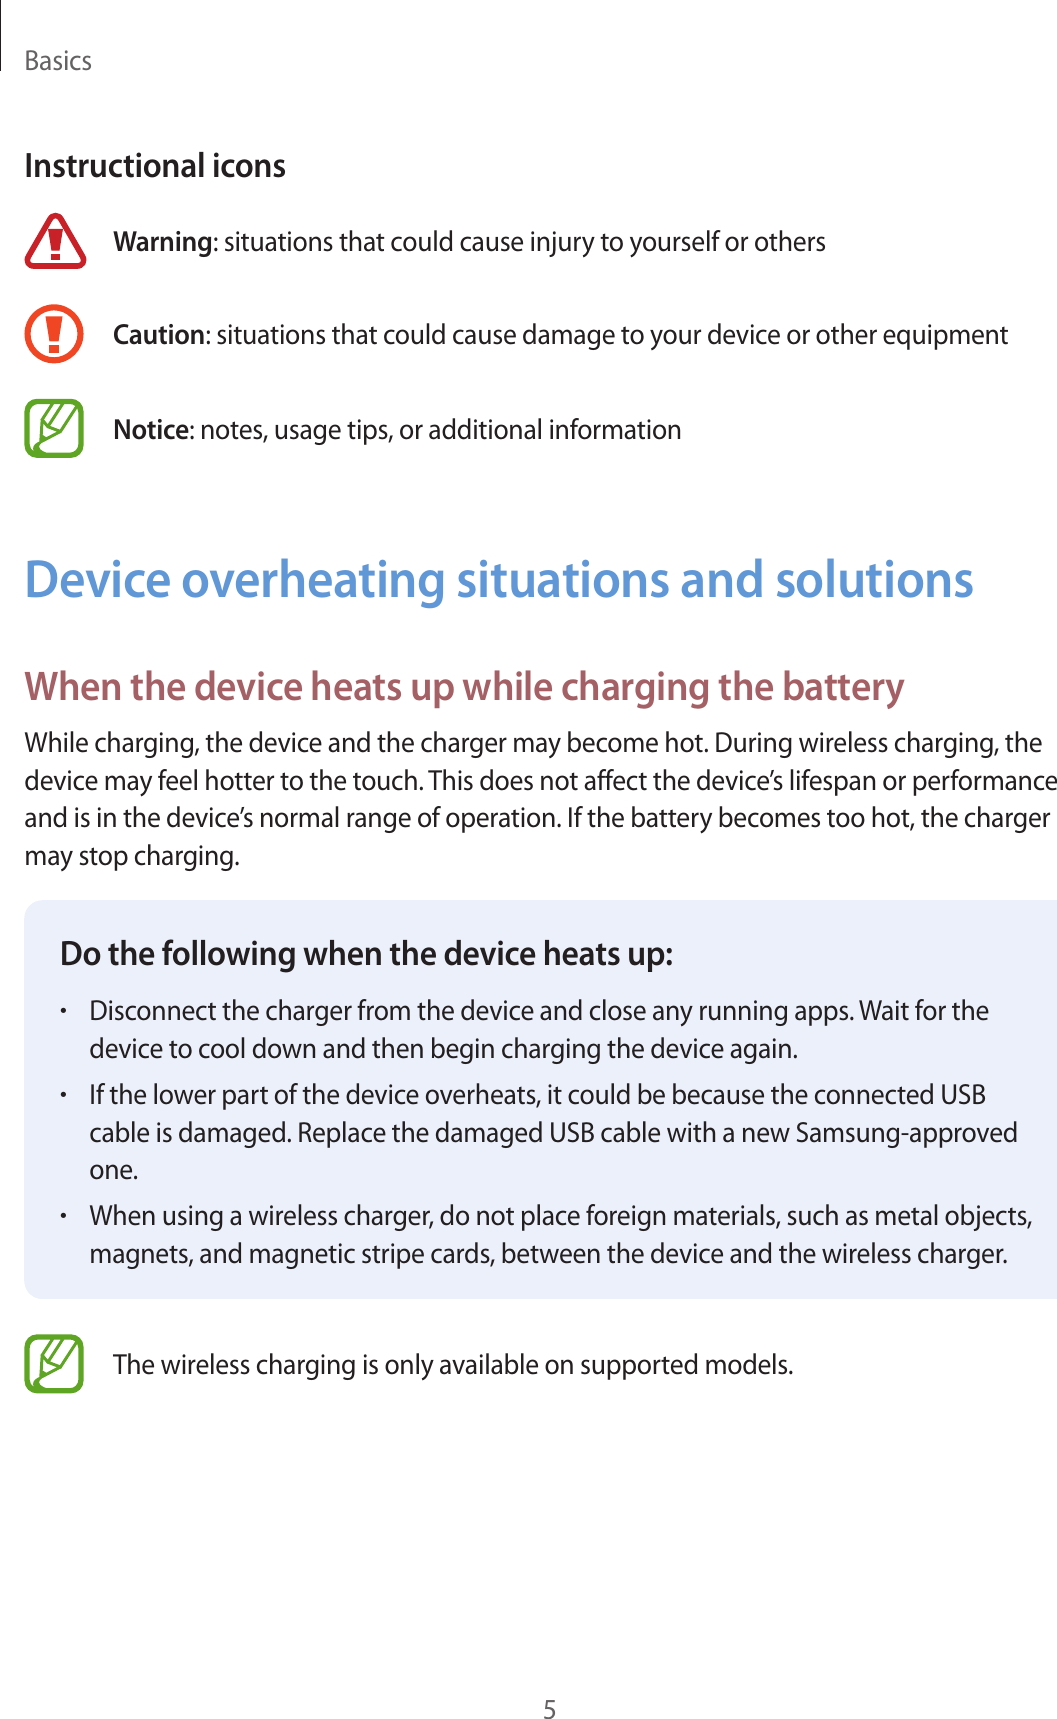 Basics5Instructional iconsWarning: situations that could cause injury to yourself or othersCaution: situations that could cause damage to your device or other equipmentNotice: notes, usage tips, or additional informationDevice overheating situations and solutionsWhen the device heats up while charging the batteryWhile charging, the device and the charger may become hot. During wireless charging, the device may feel hotter to the touch. This does not affect the device’s lifespan or performance and is in the device’s normal range of operation. If the battery becomes too hot, the charger may stop charging.Do the following when the device heats up:•Disconnect the charger from the device and close any running apps. Wait for the device to cool down and then begin charging the device again.•If the lower part of the device overheats, it could be because the connected USB cable is damaged. Replace the damaged USB cable with a new Samsung-approved one.•When using a wireless charger, do not place foreign materials, such as metal objects, magnets, and magnetic stripe cards, between the device and the wireless charger.The wireless charging is only available on supported models.